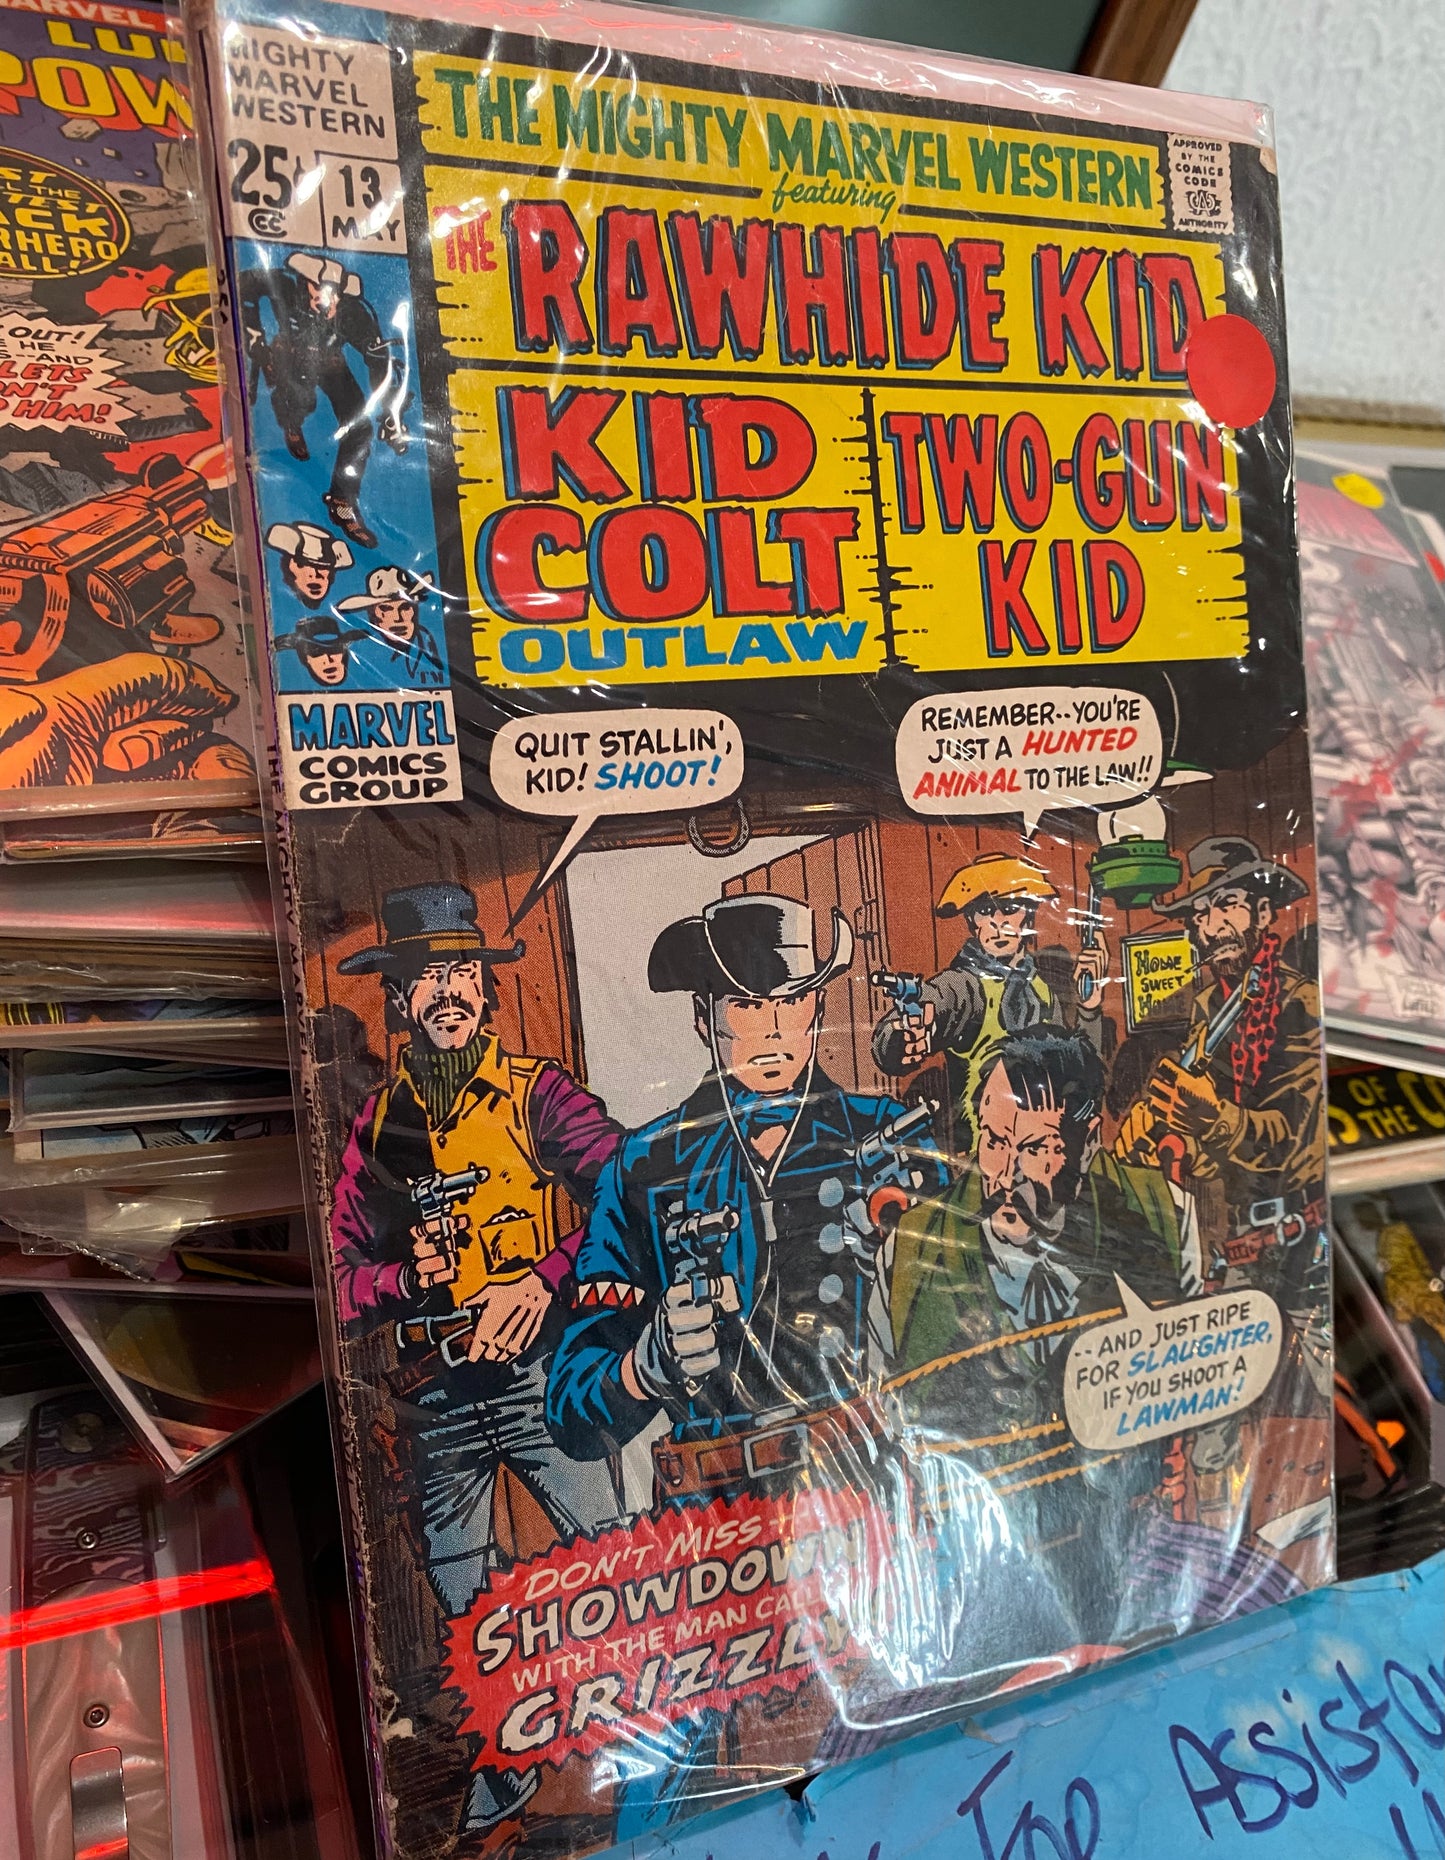 Marvel: The Rawhide Kid, Kid Colt Outlaw, and Two-Gun Kid May No.13